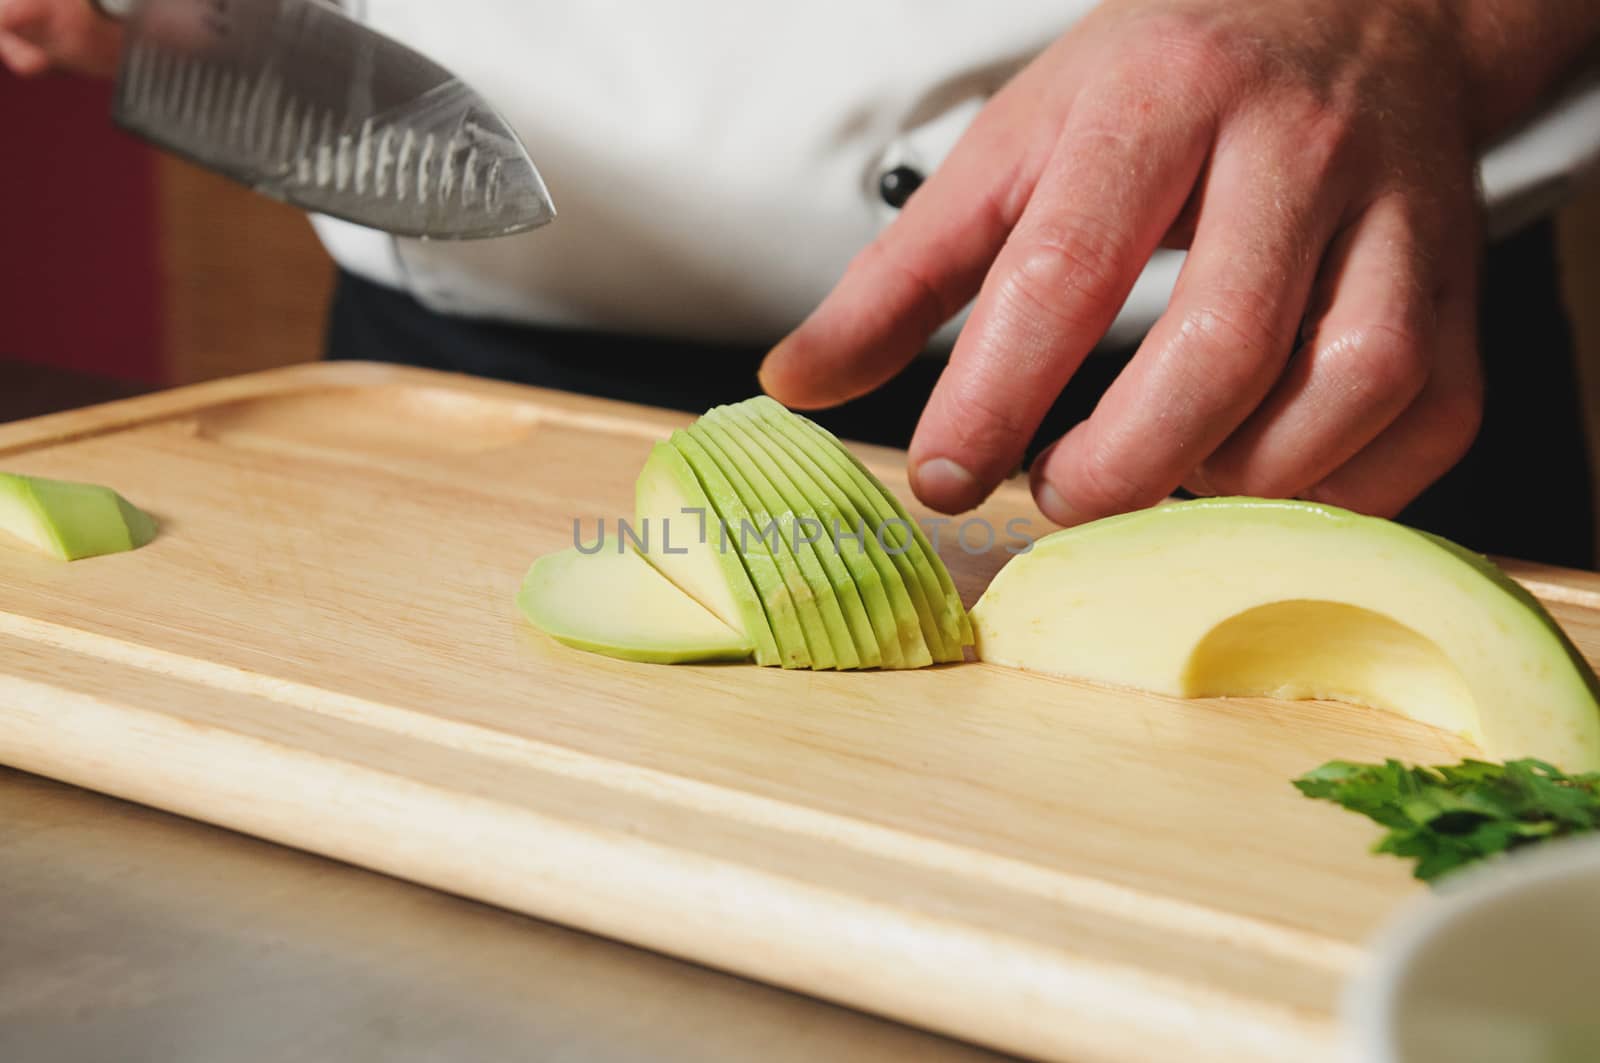 chef cutting lavocado on table with knife